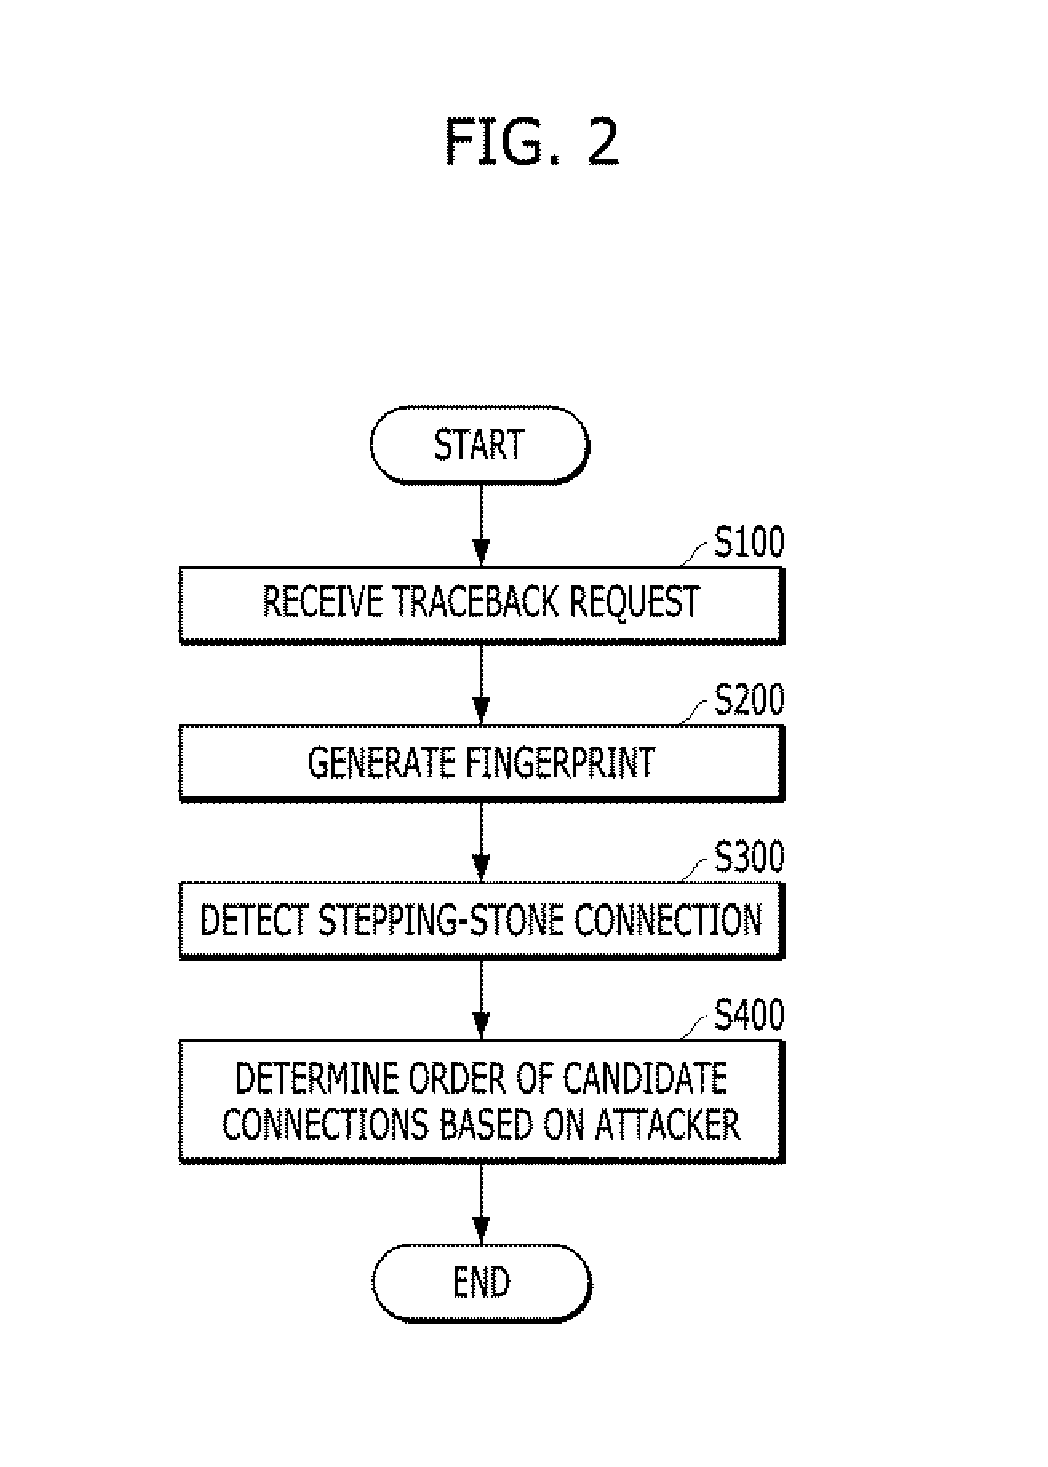 System and method for connection fingerprint generation and stepping-stone traceback based on netflow